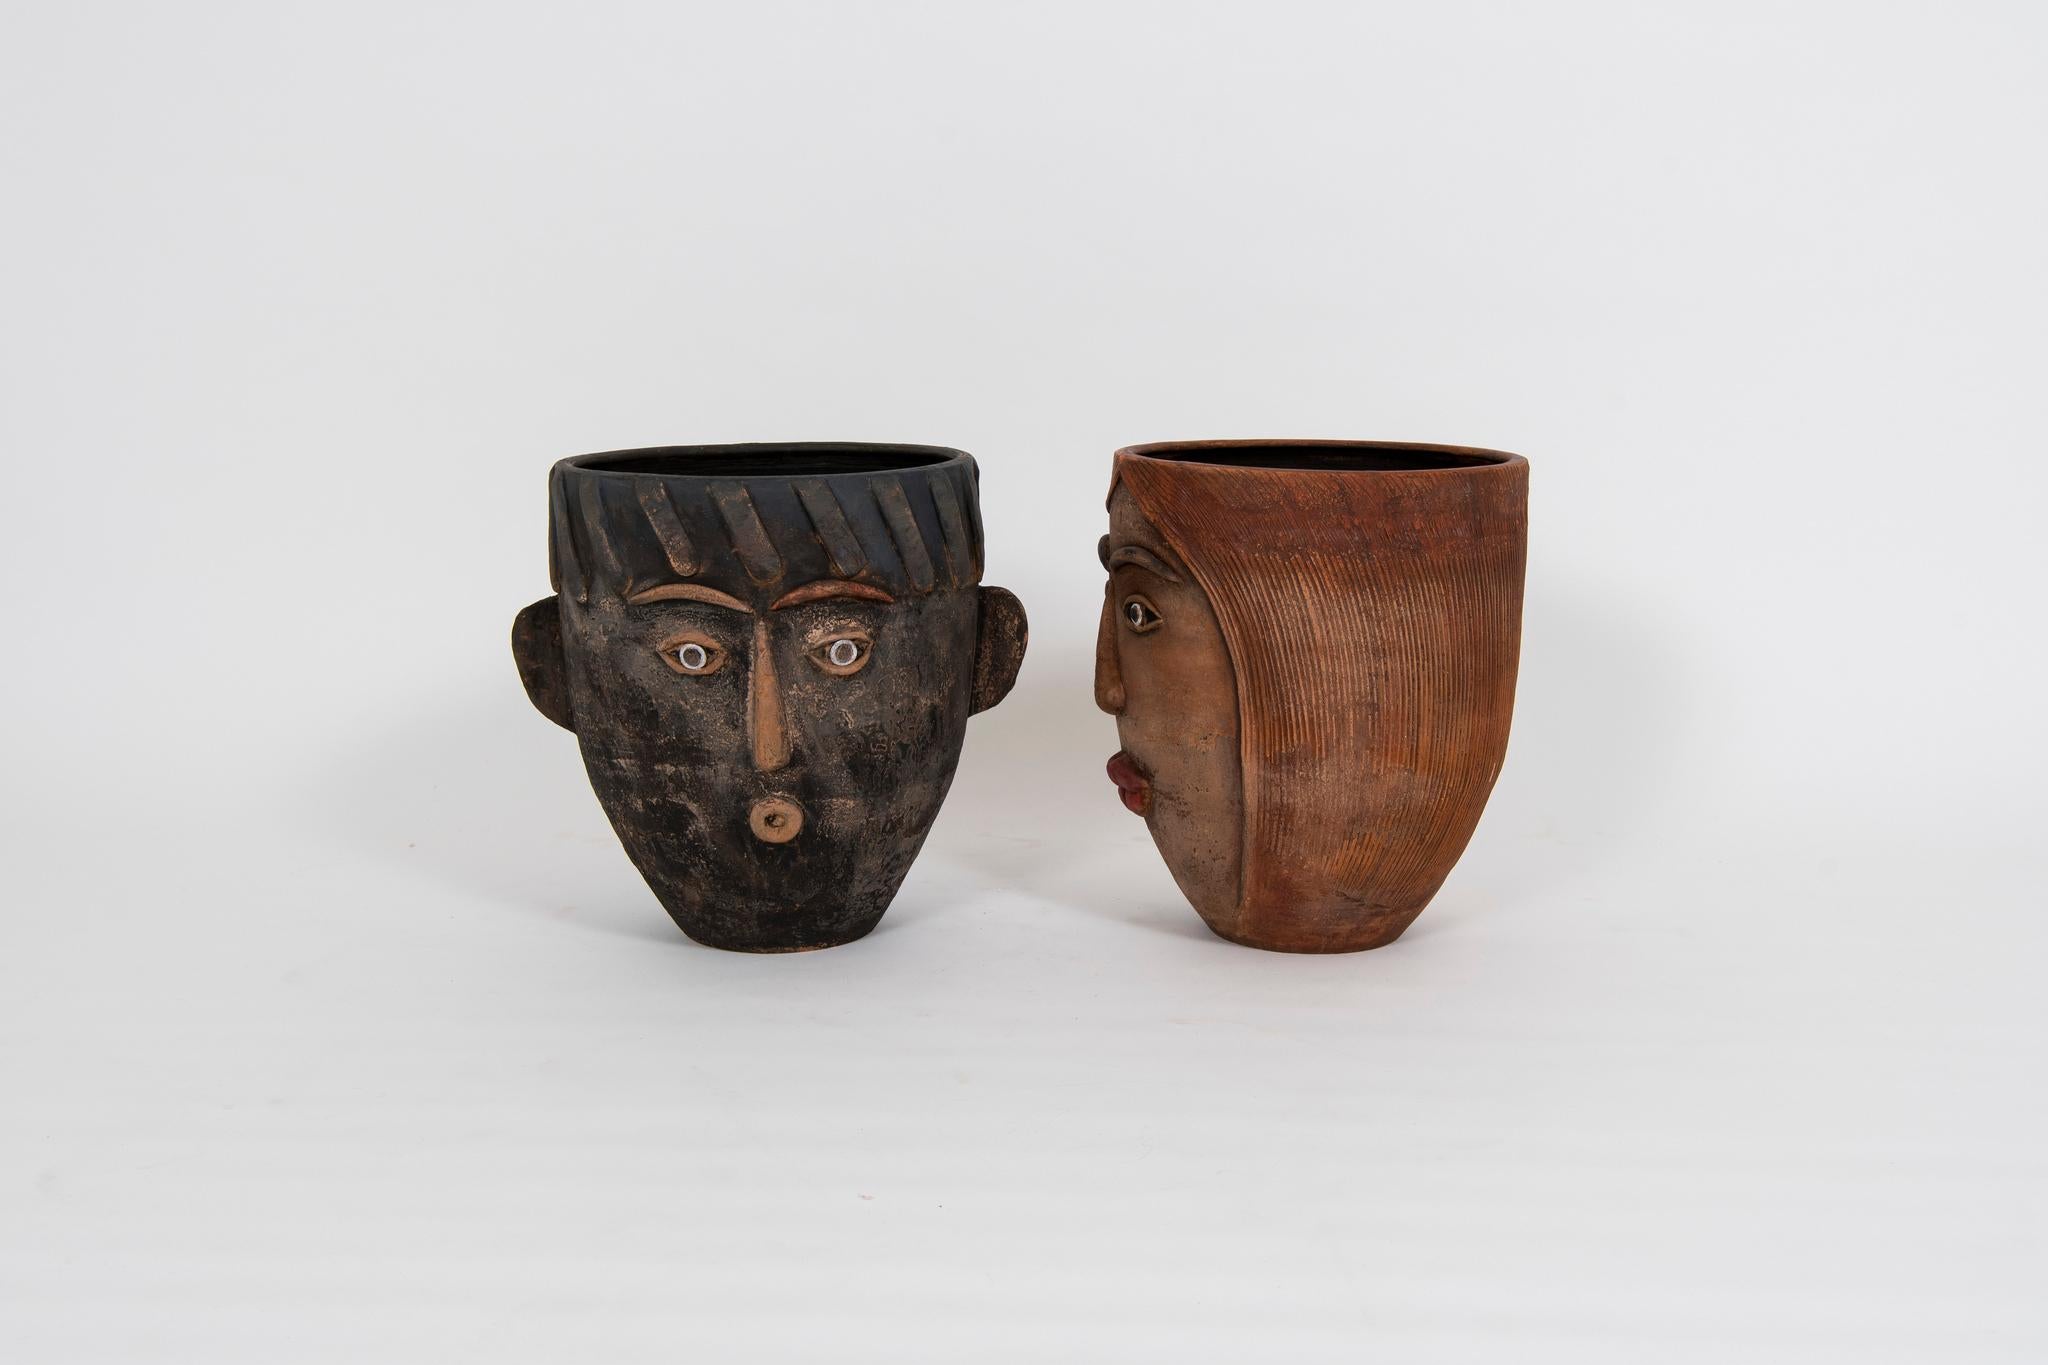 Pair of 1960s art terra cotta face planters, one male head showing ears and one female head.

Dimensions:
Male 18